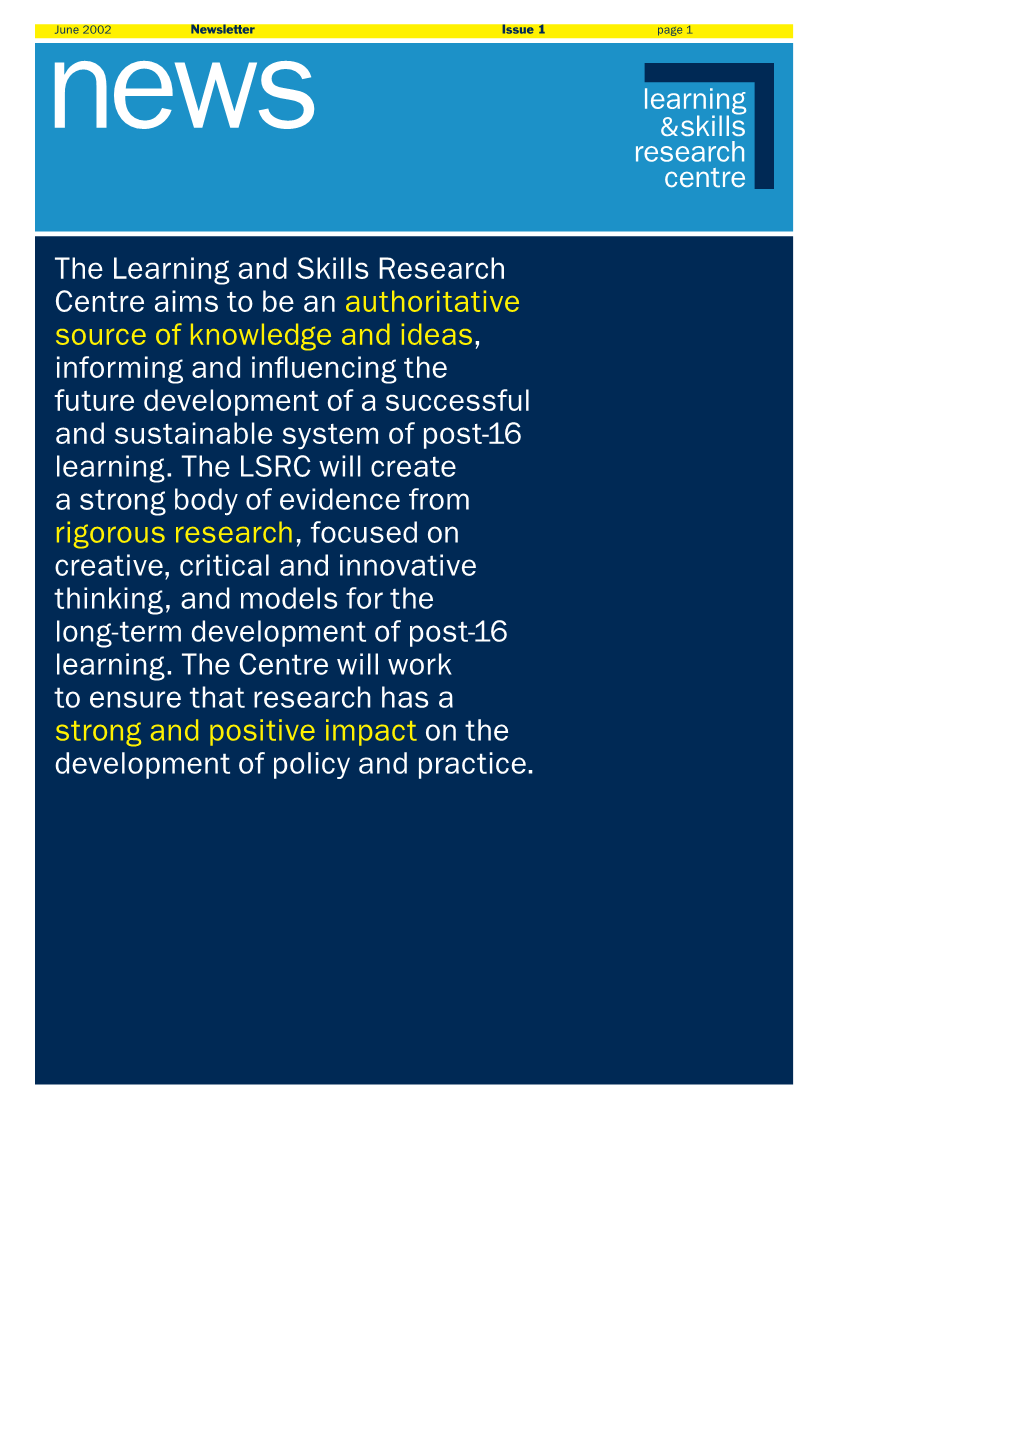 The Learning and Skills Research Centre Aims to Be an Authoritative